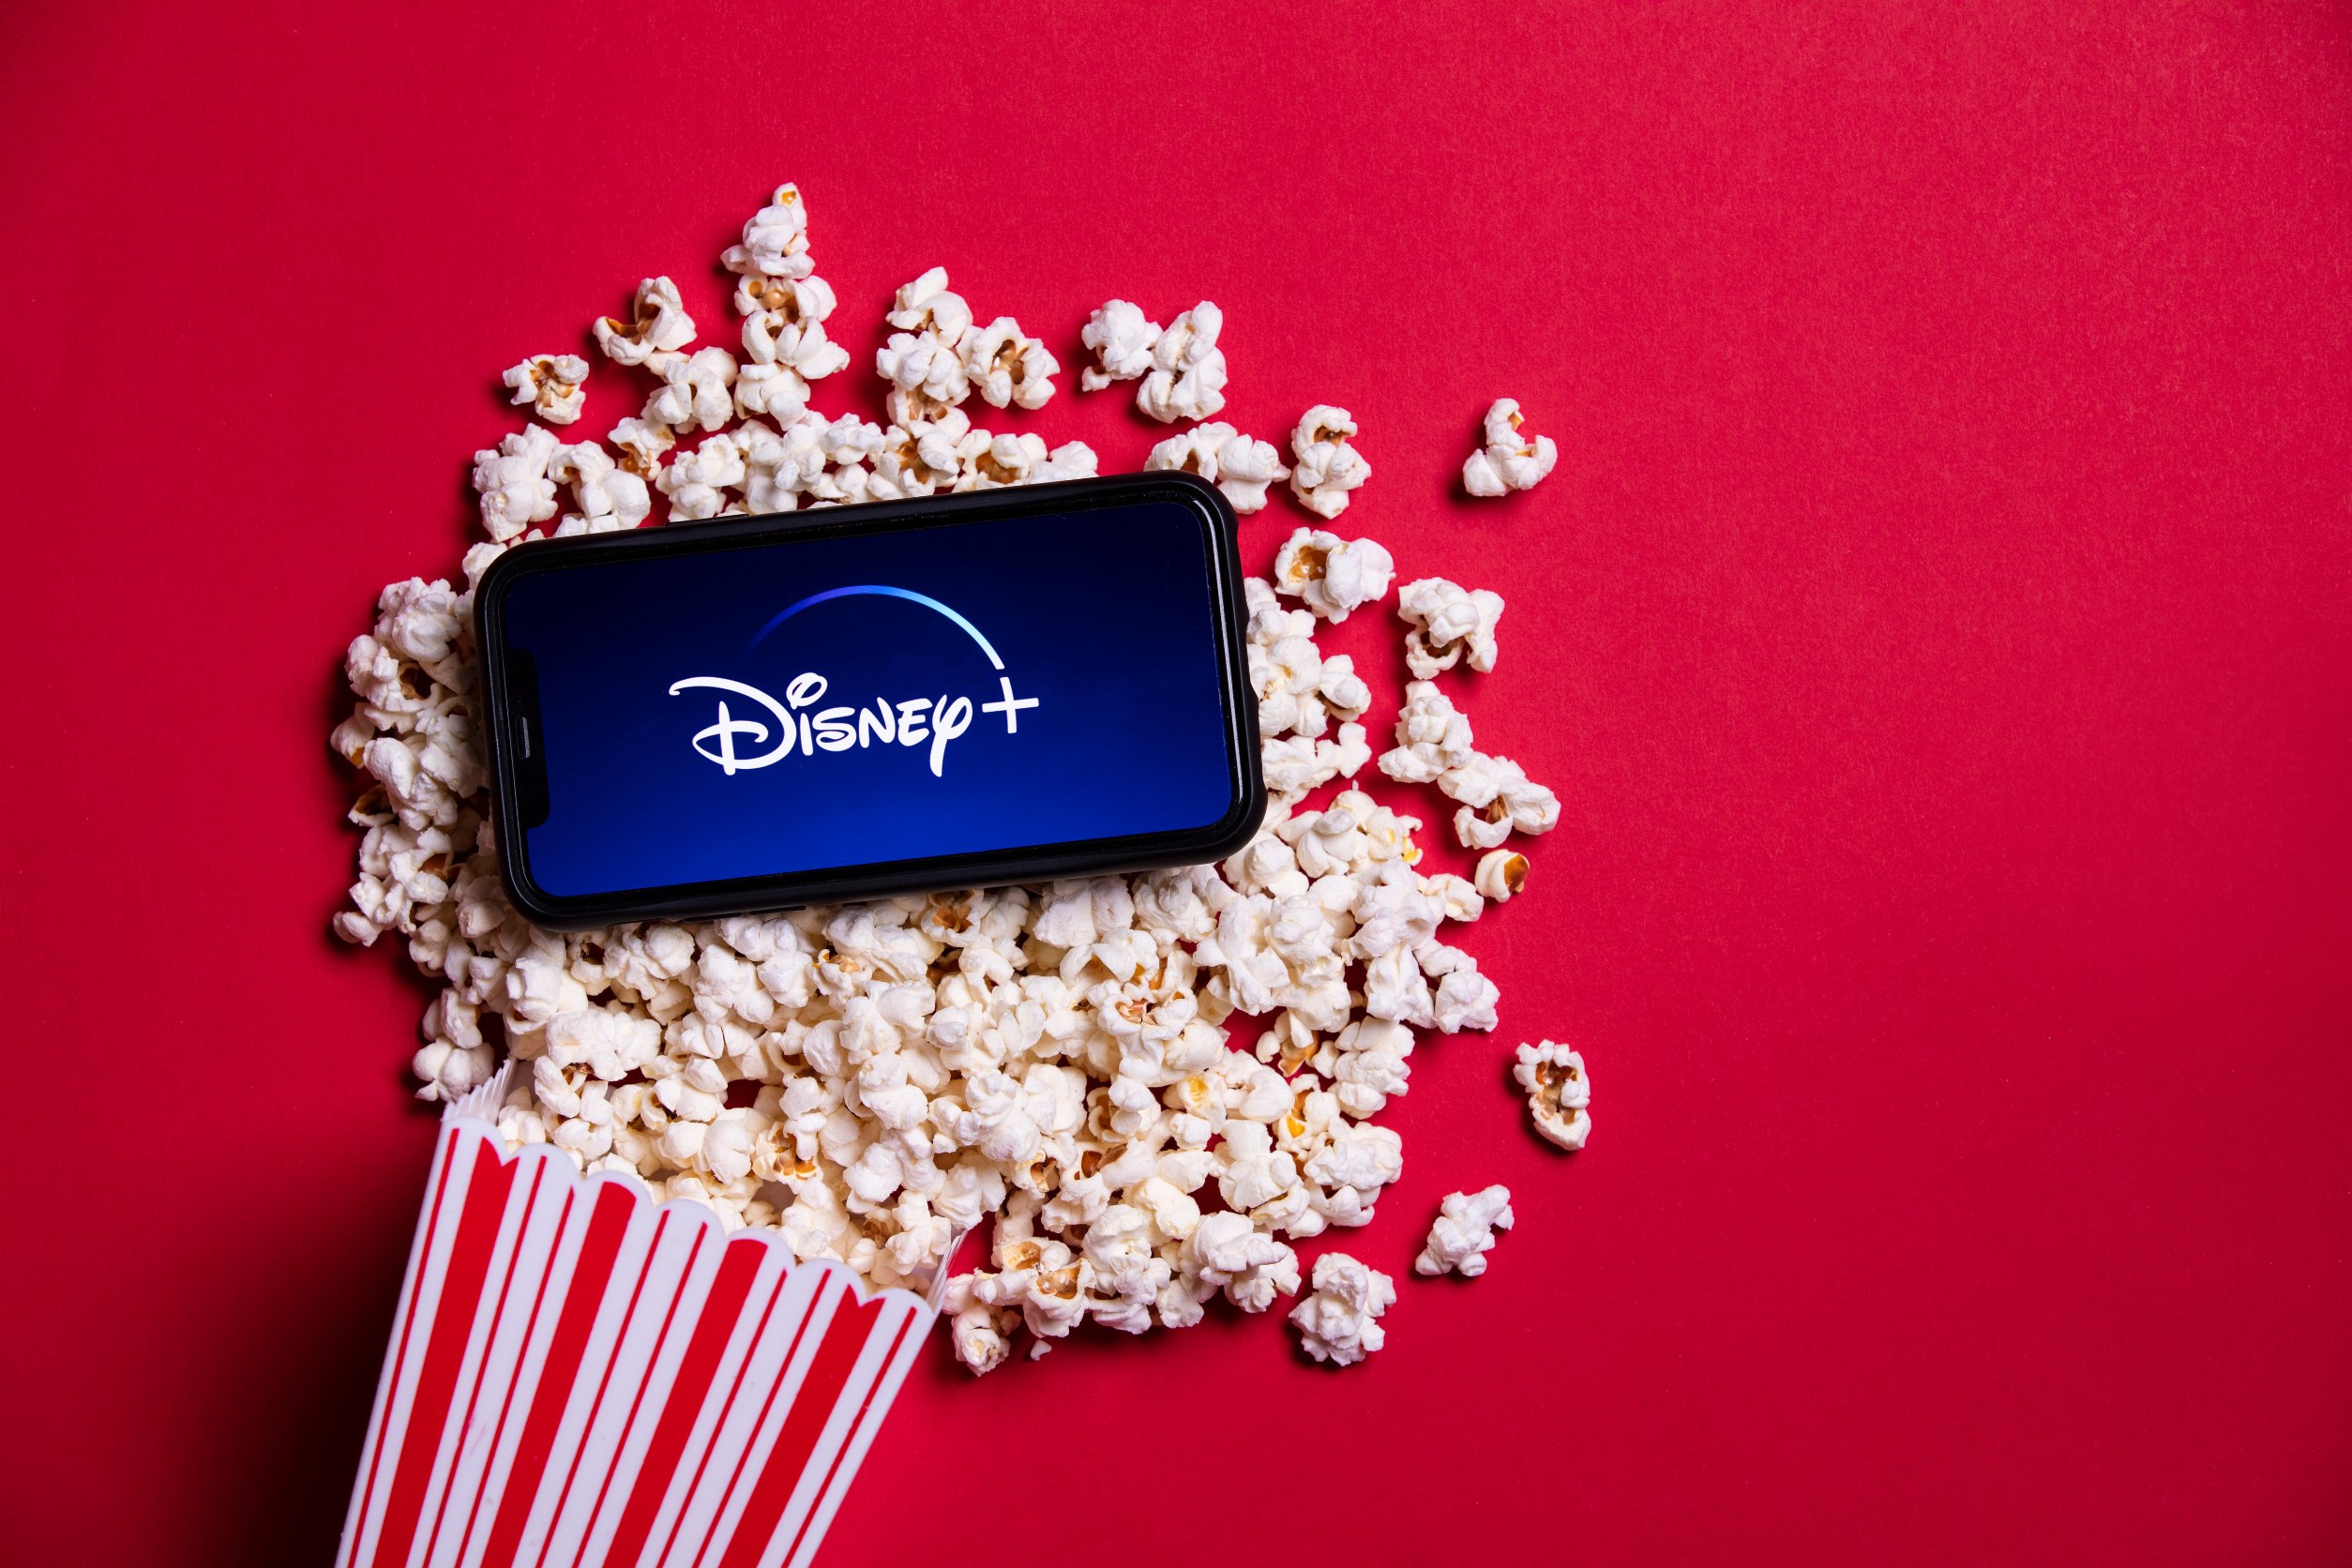 Disney just surpassed Netflix in ‘total’ number of subscribers - Rich Picks Daily